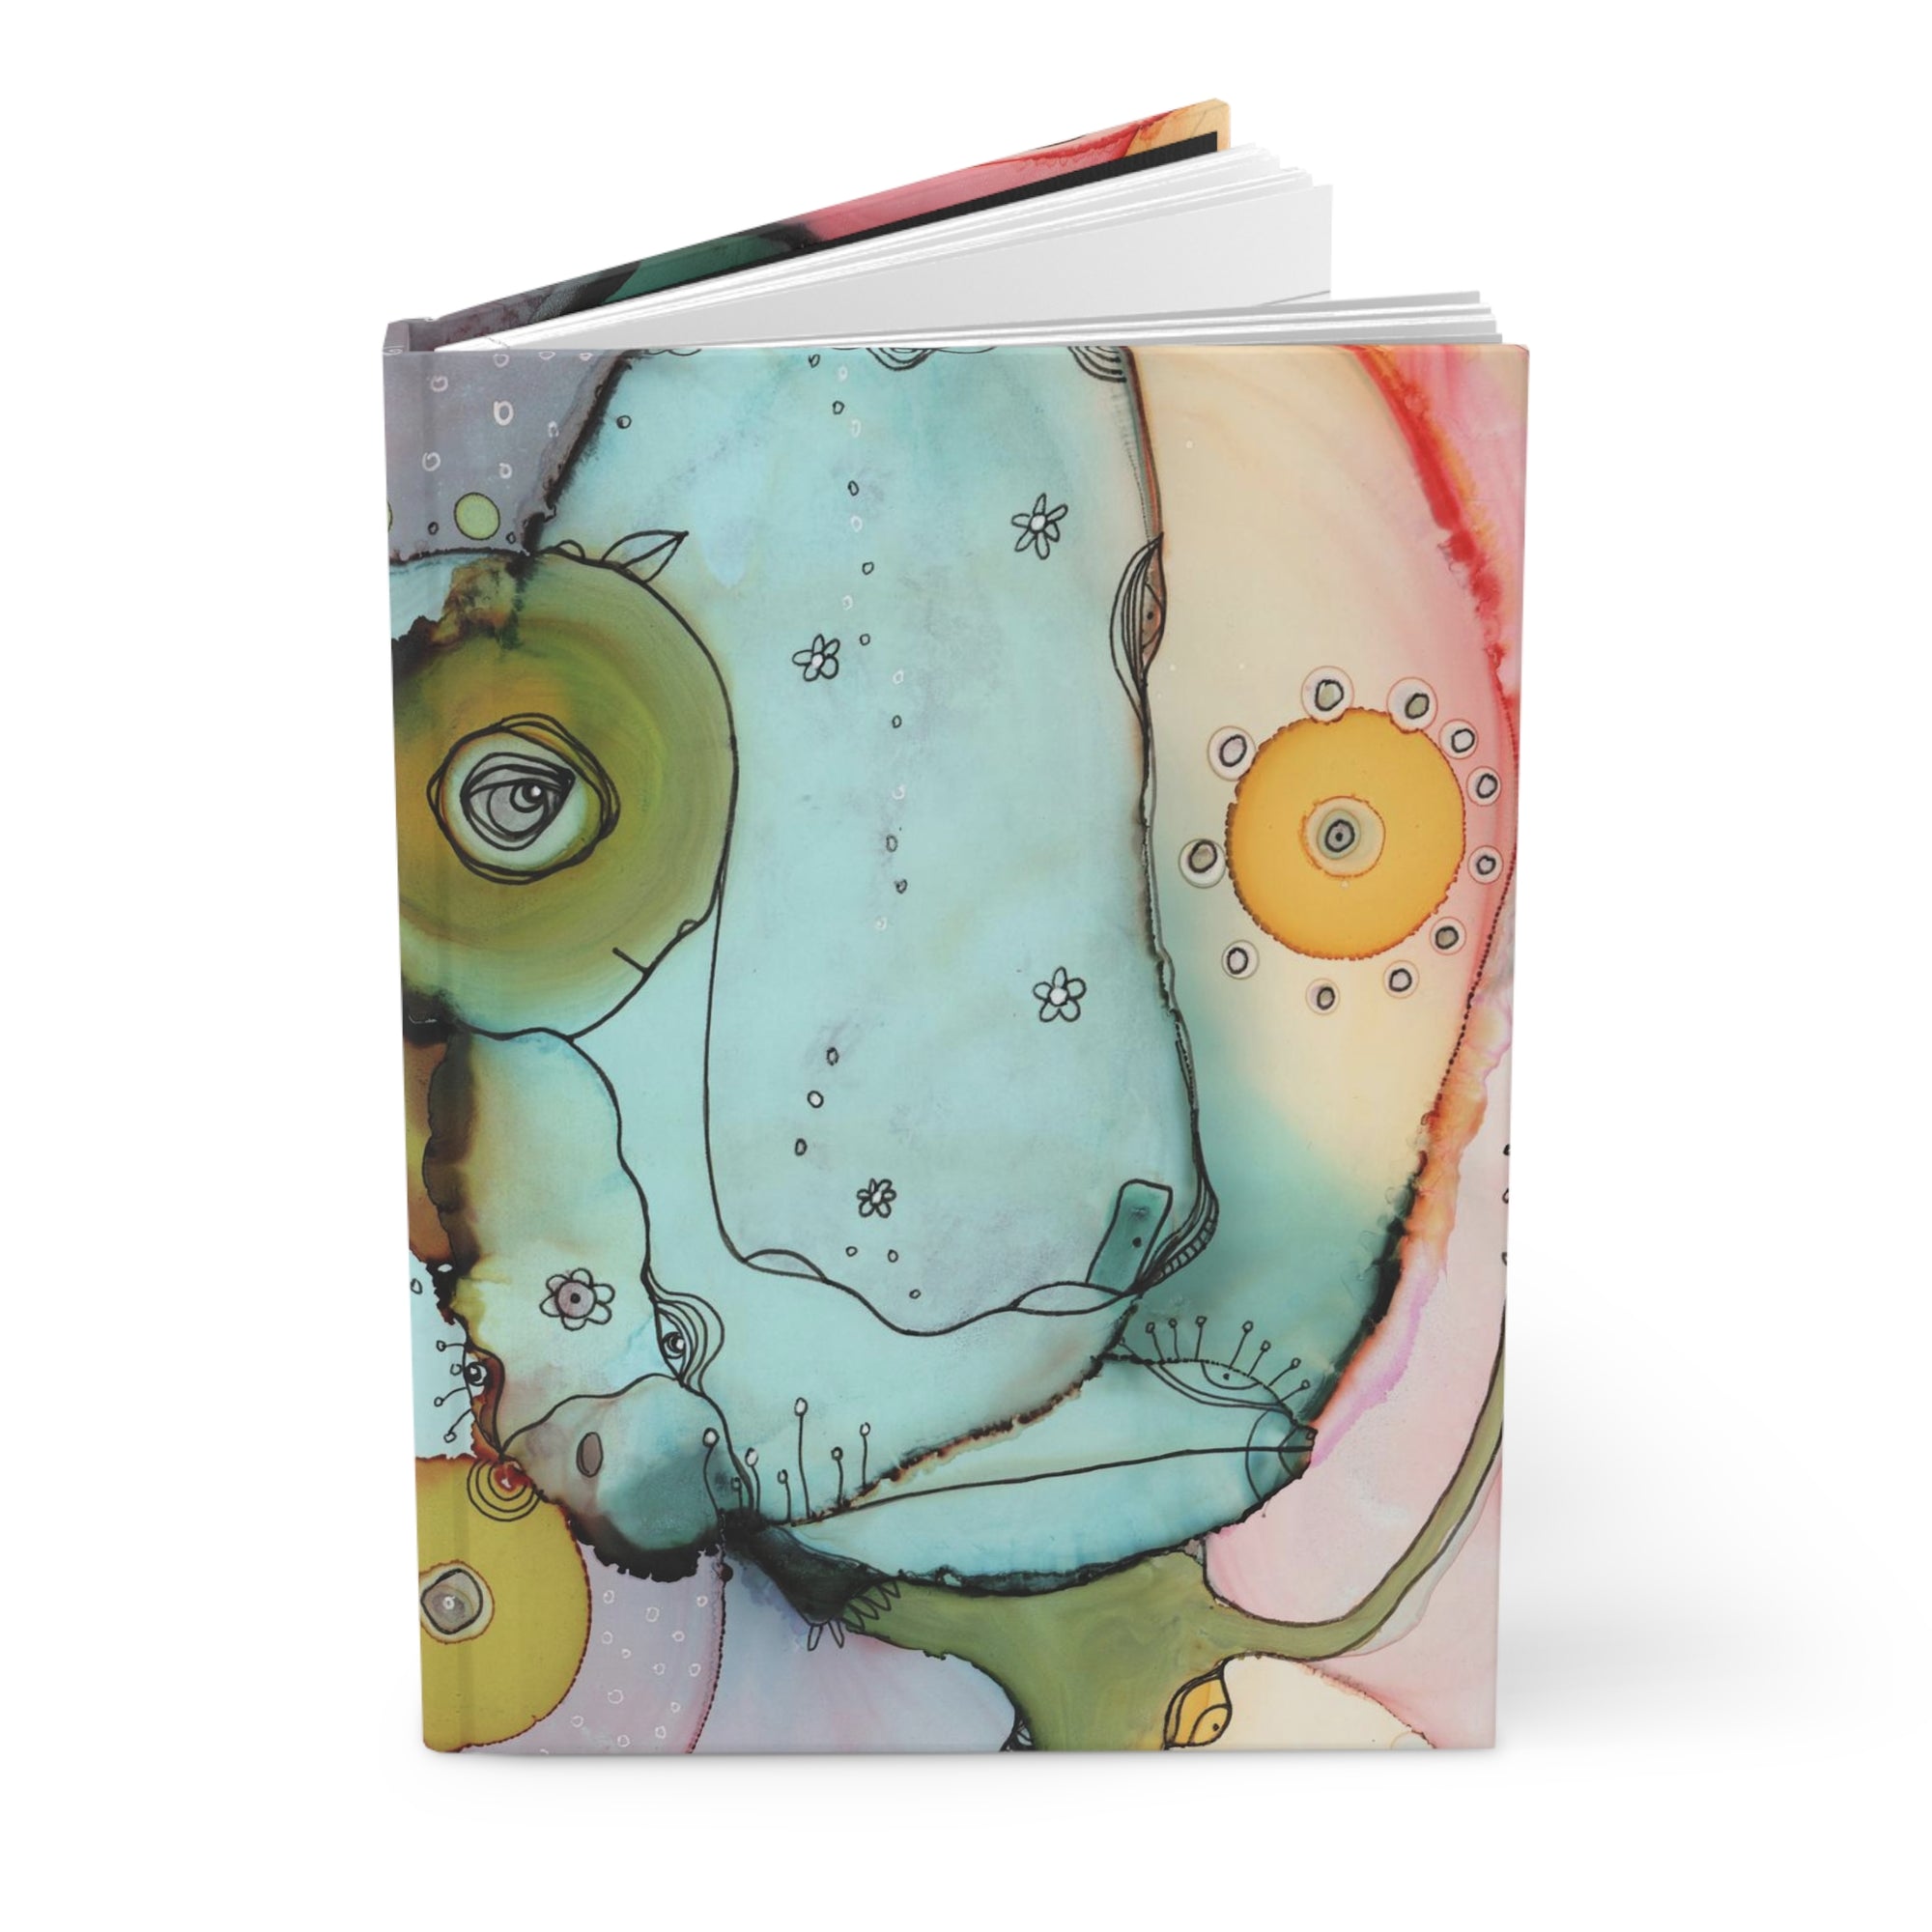 Whimsical Face on Hardcover Dream Journal "Dance with me"